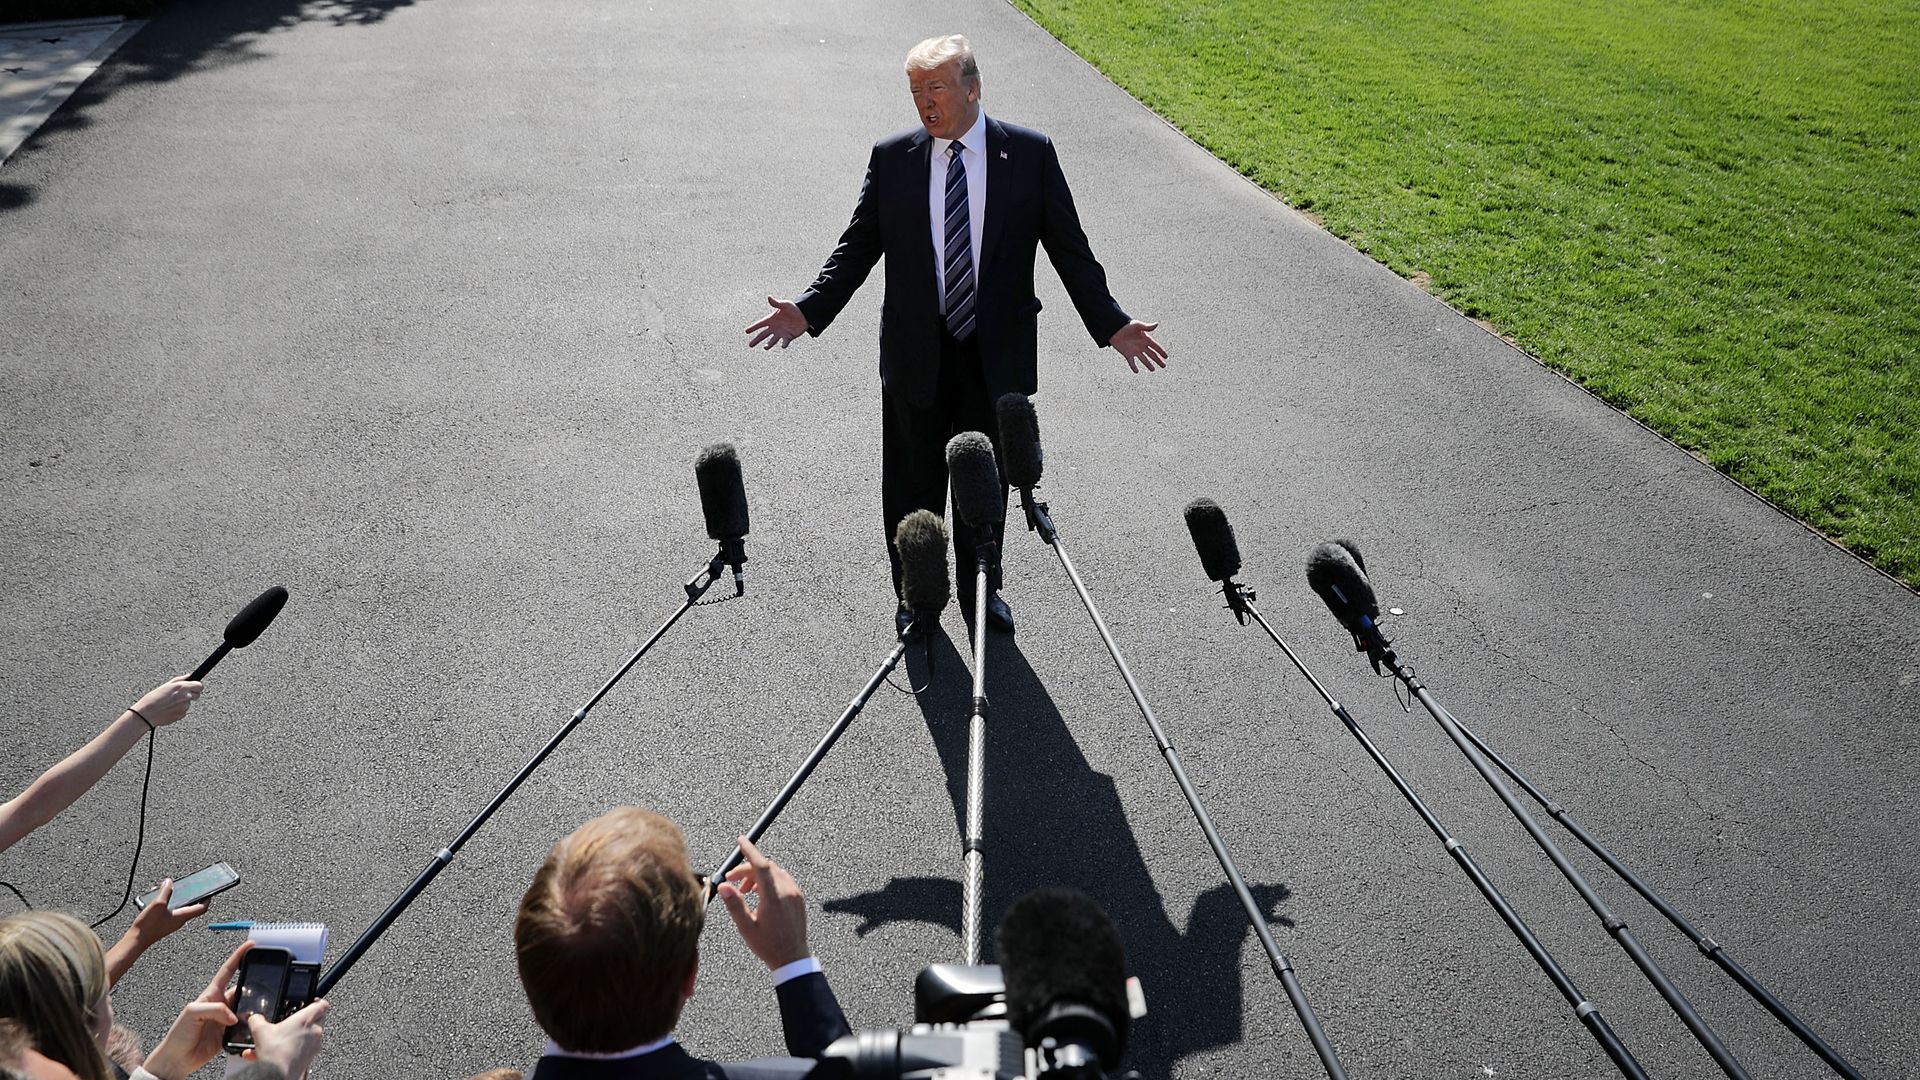 Donald Trump standing on asphalt surrounded by microphones.